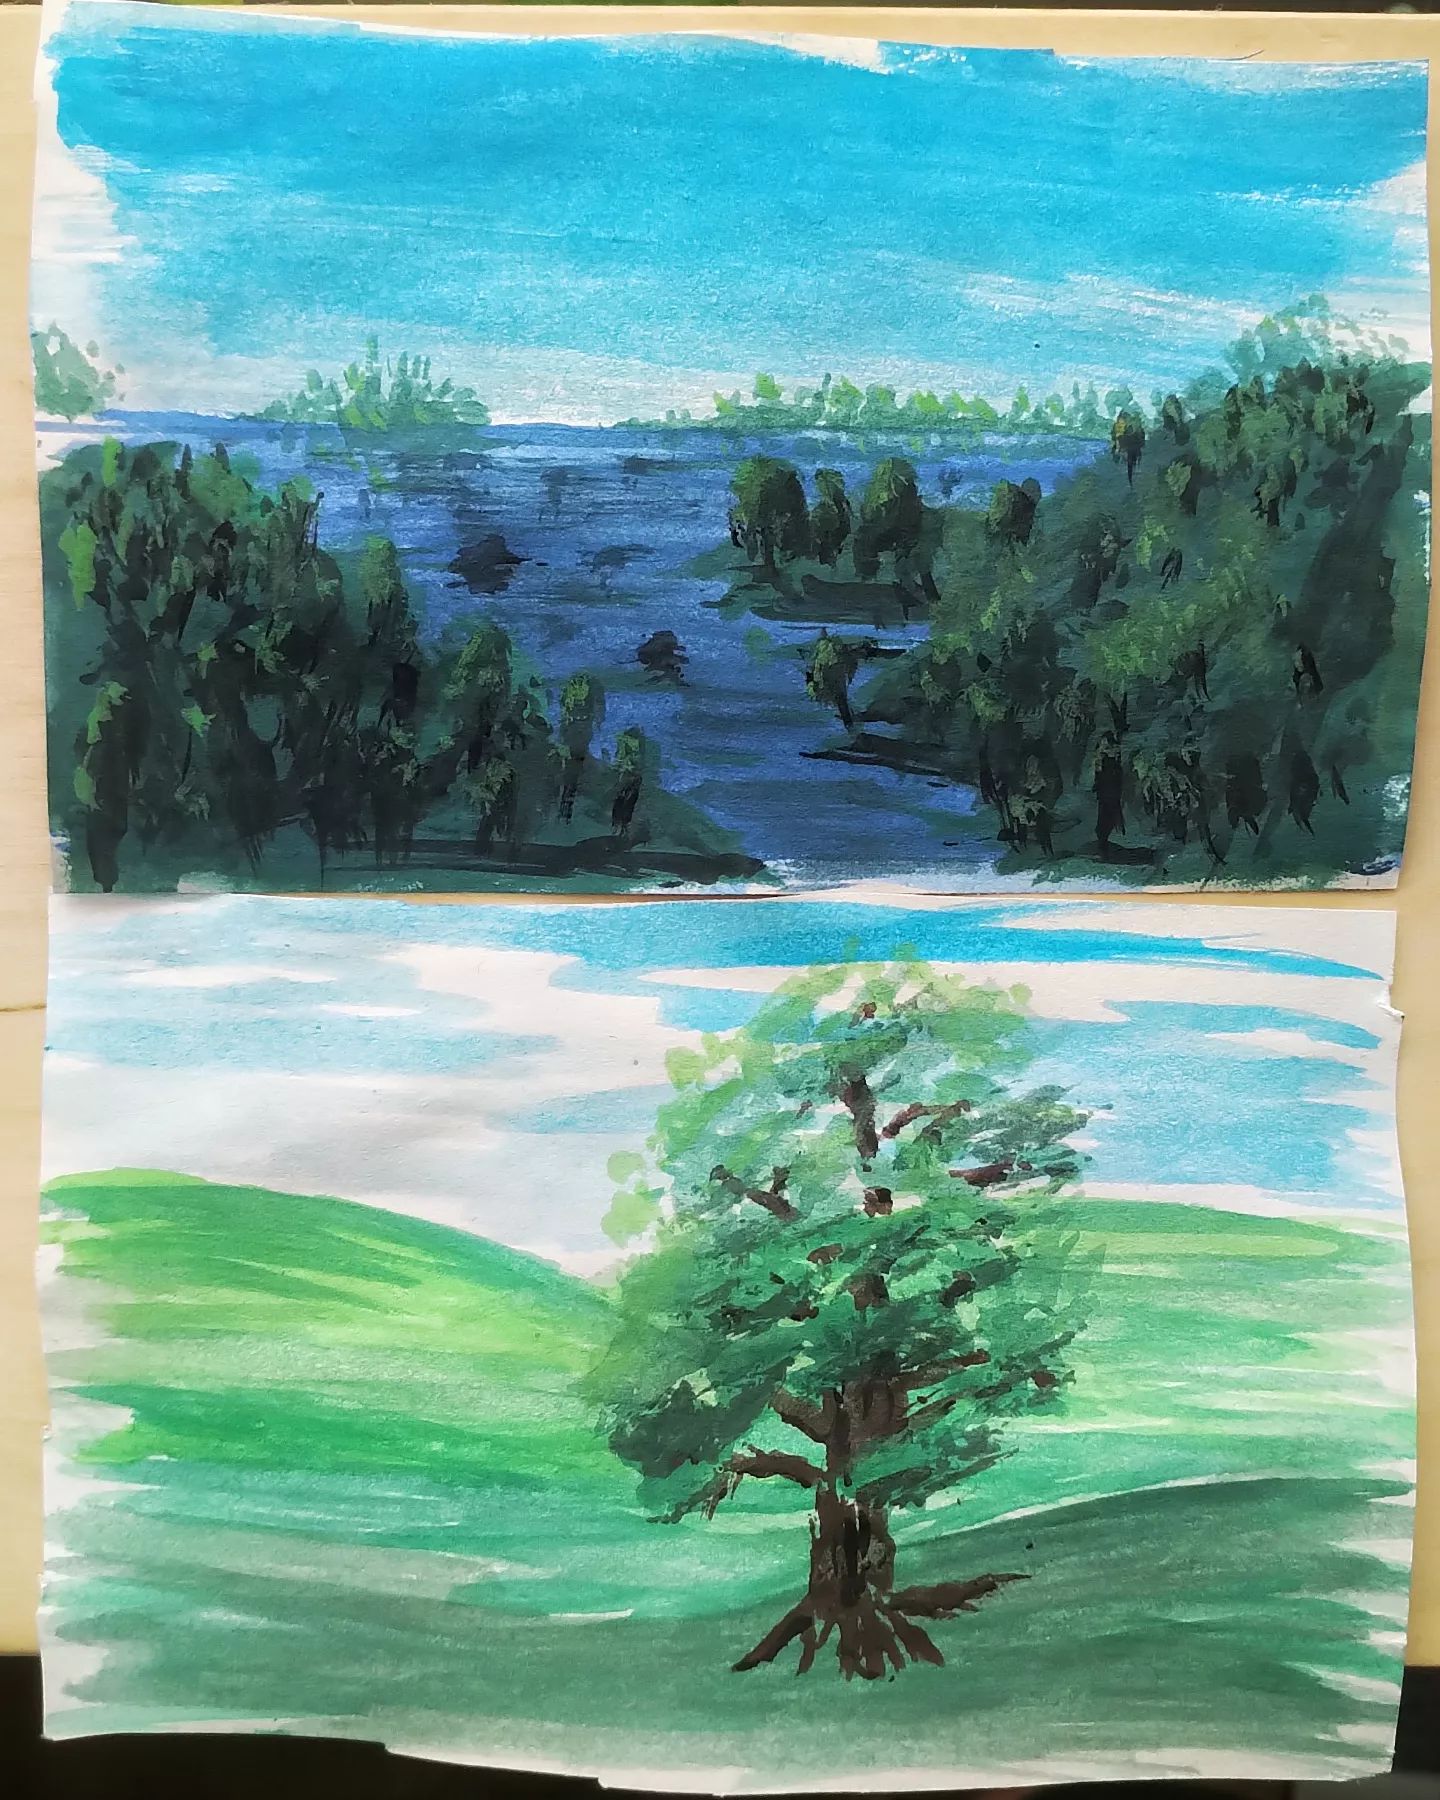 "Two landscape sketches."